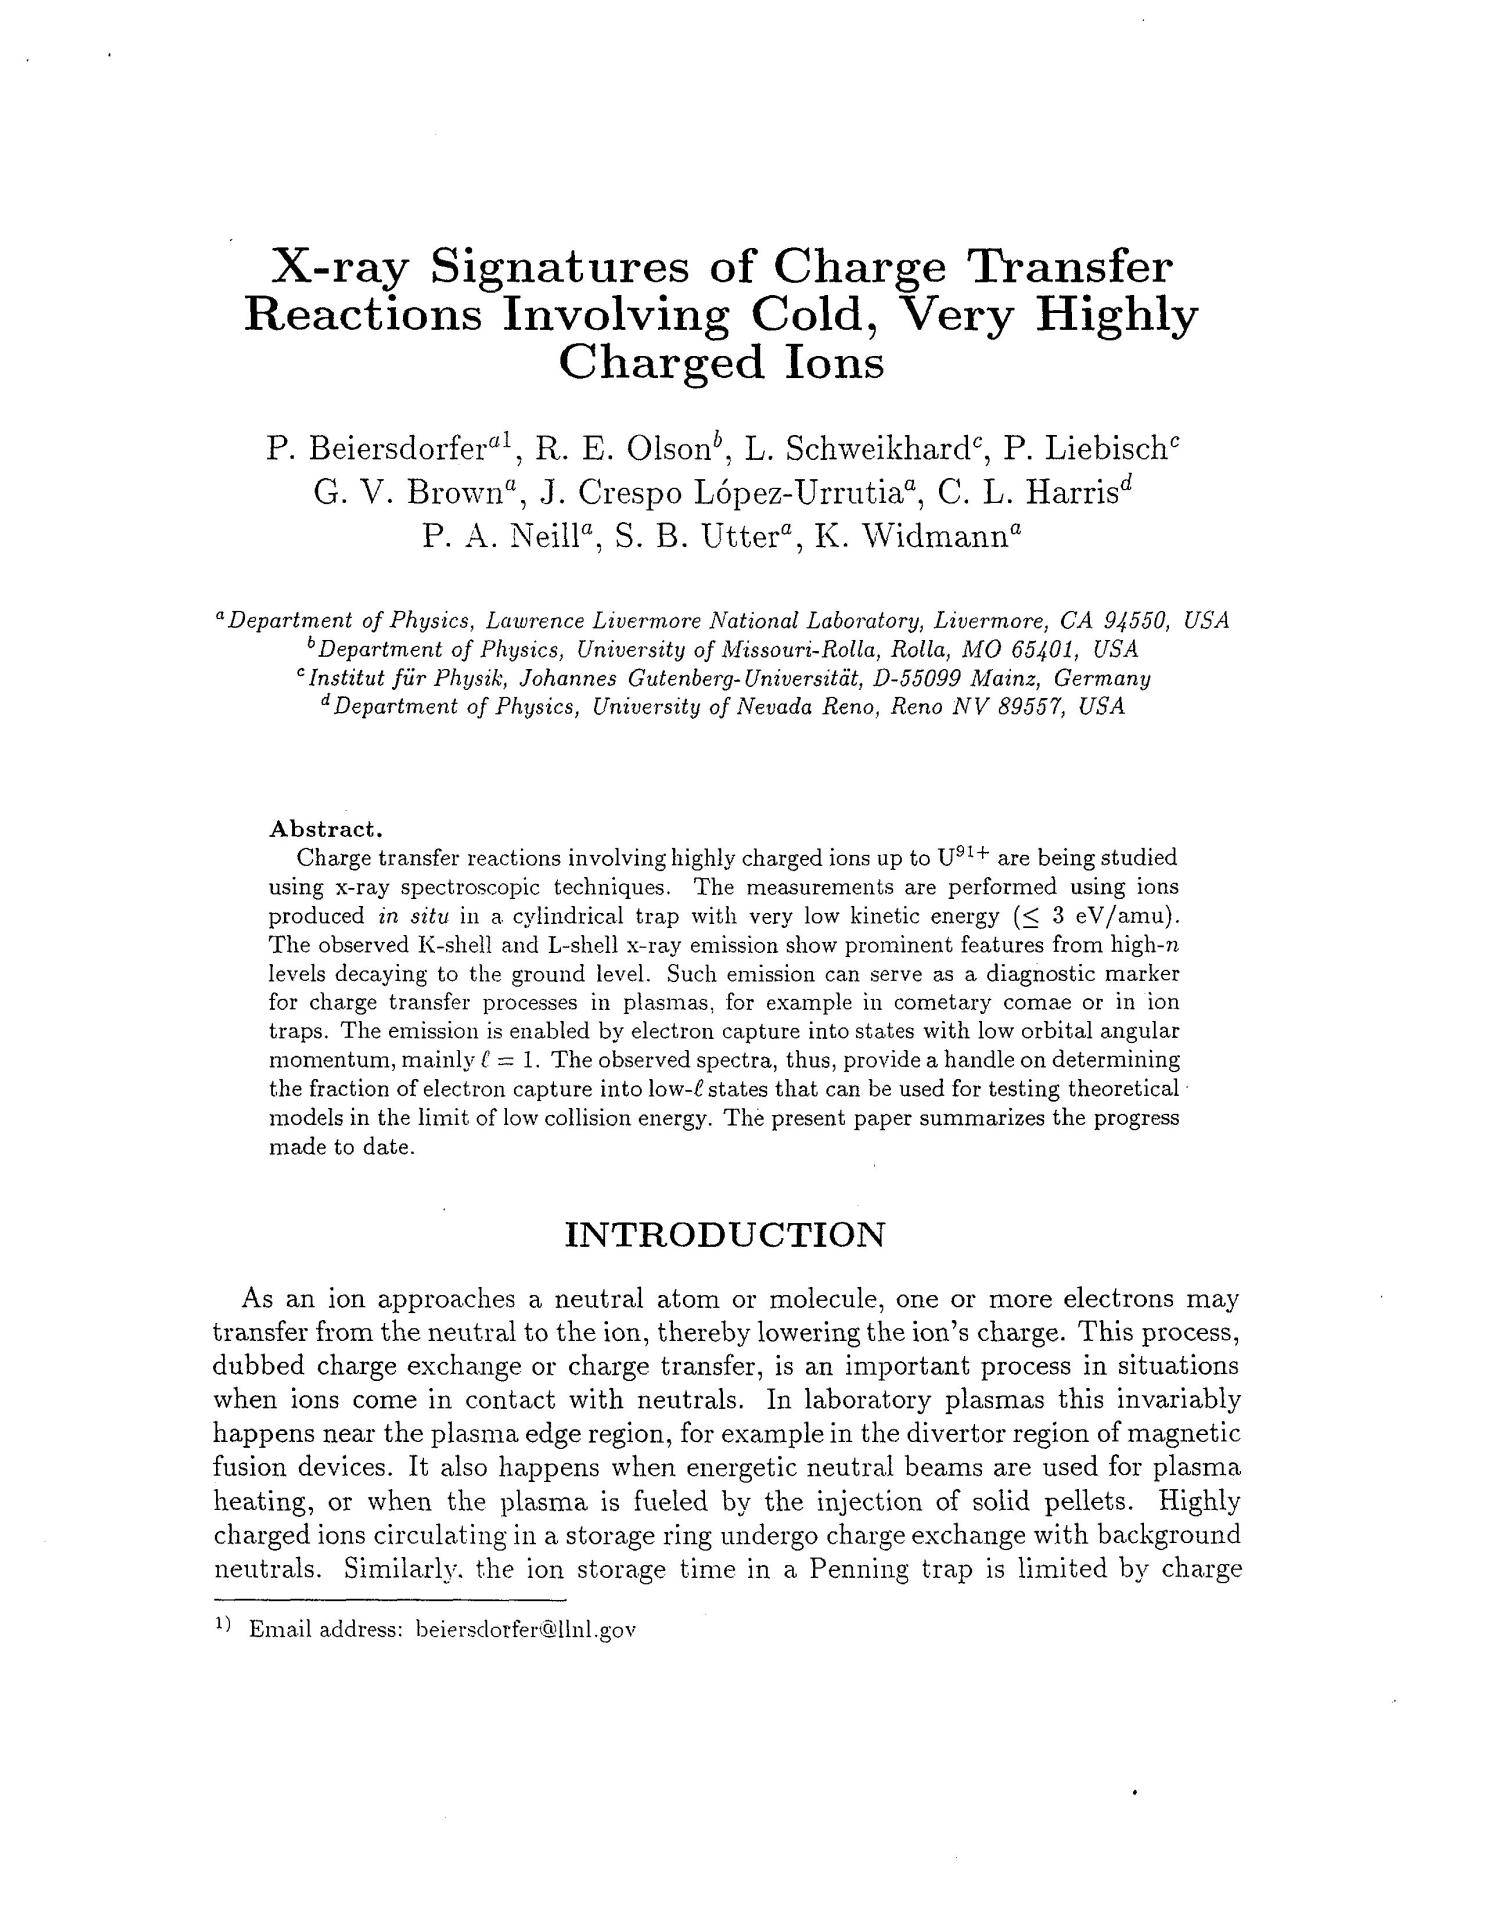 X-ray signatures of charge transfer reactions involving cold, very highly charged ions
                                                
                                                    [Sequence #]: 3 of 11
                                                